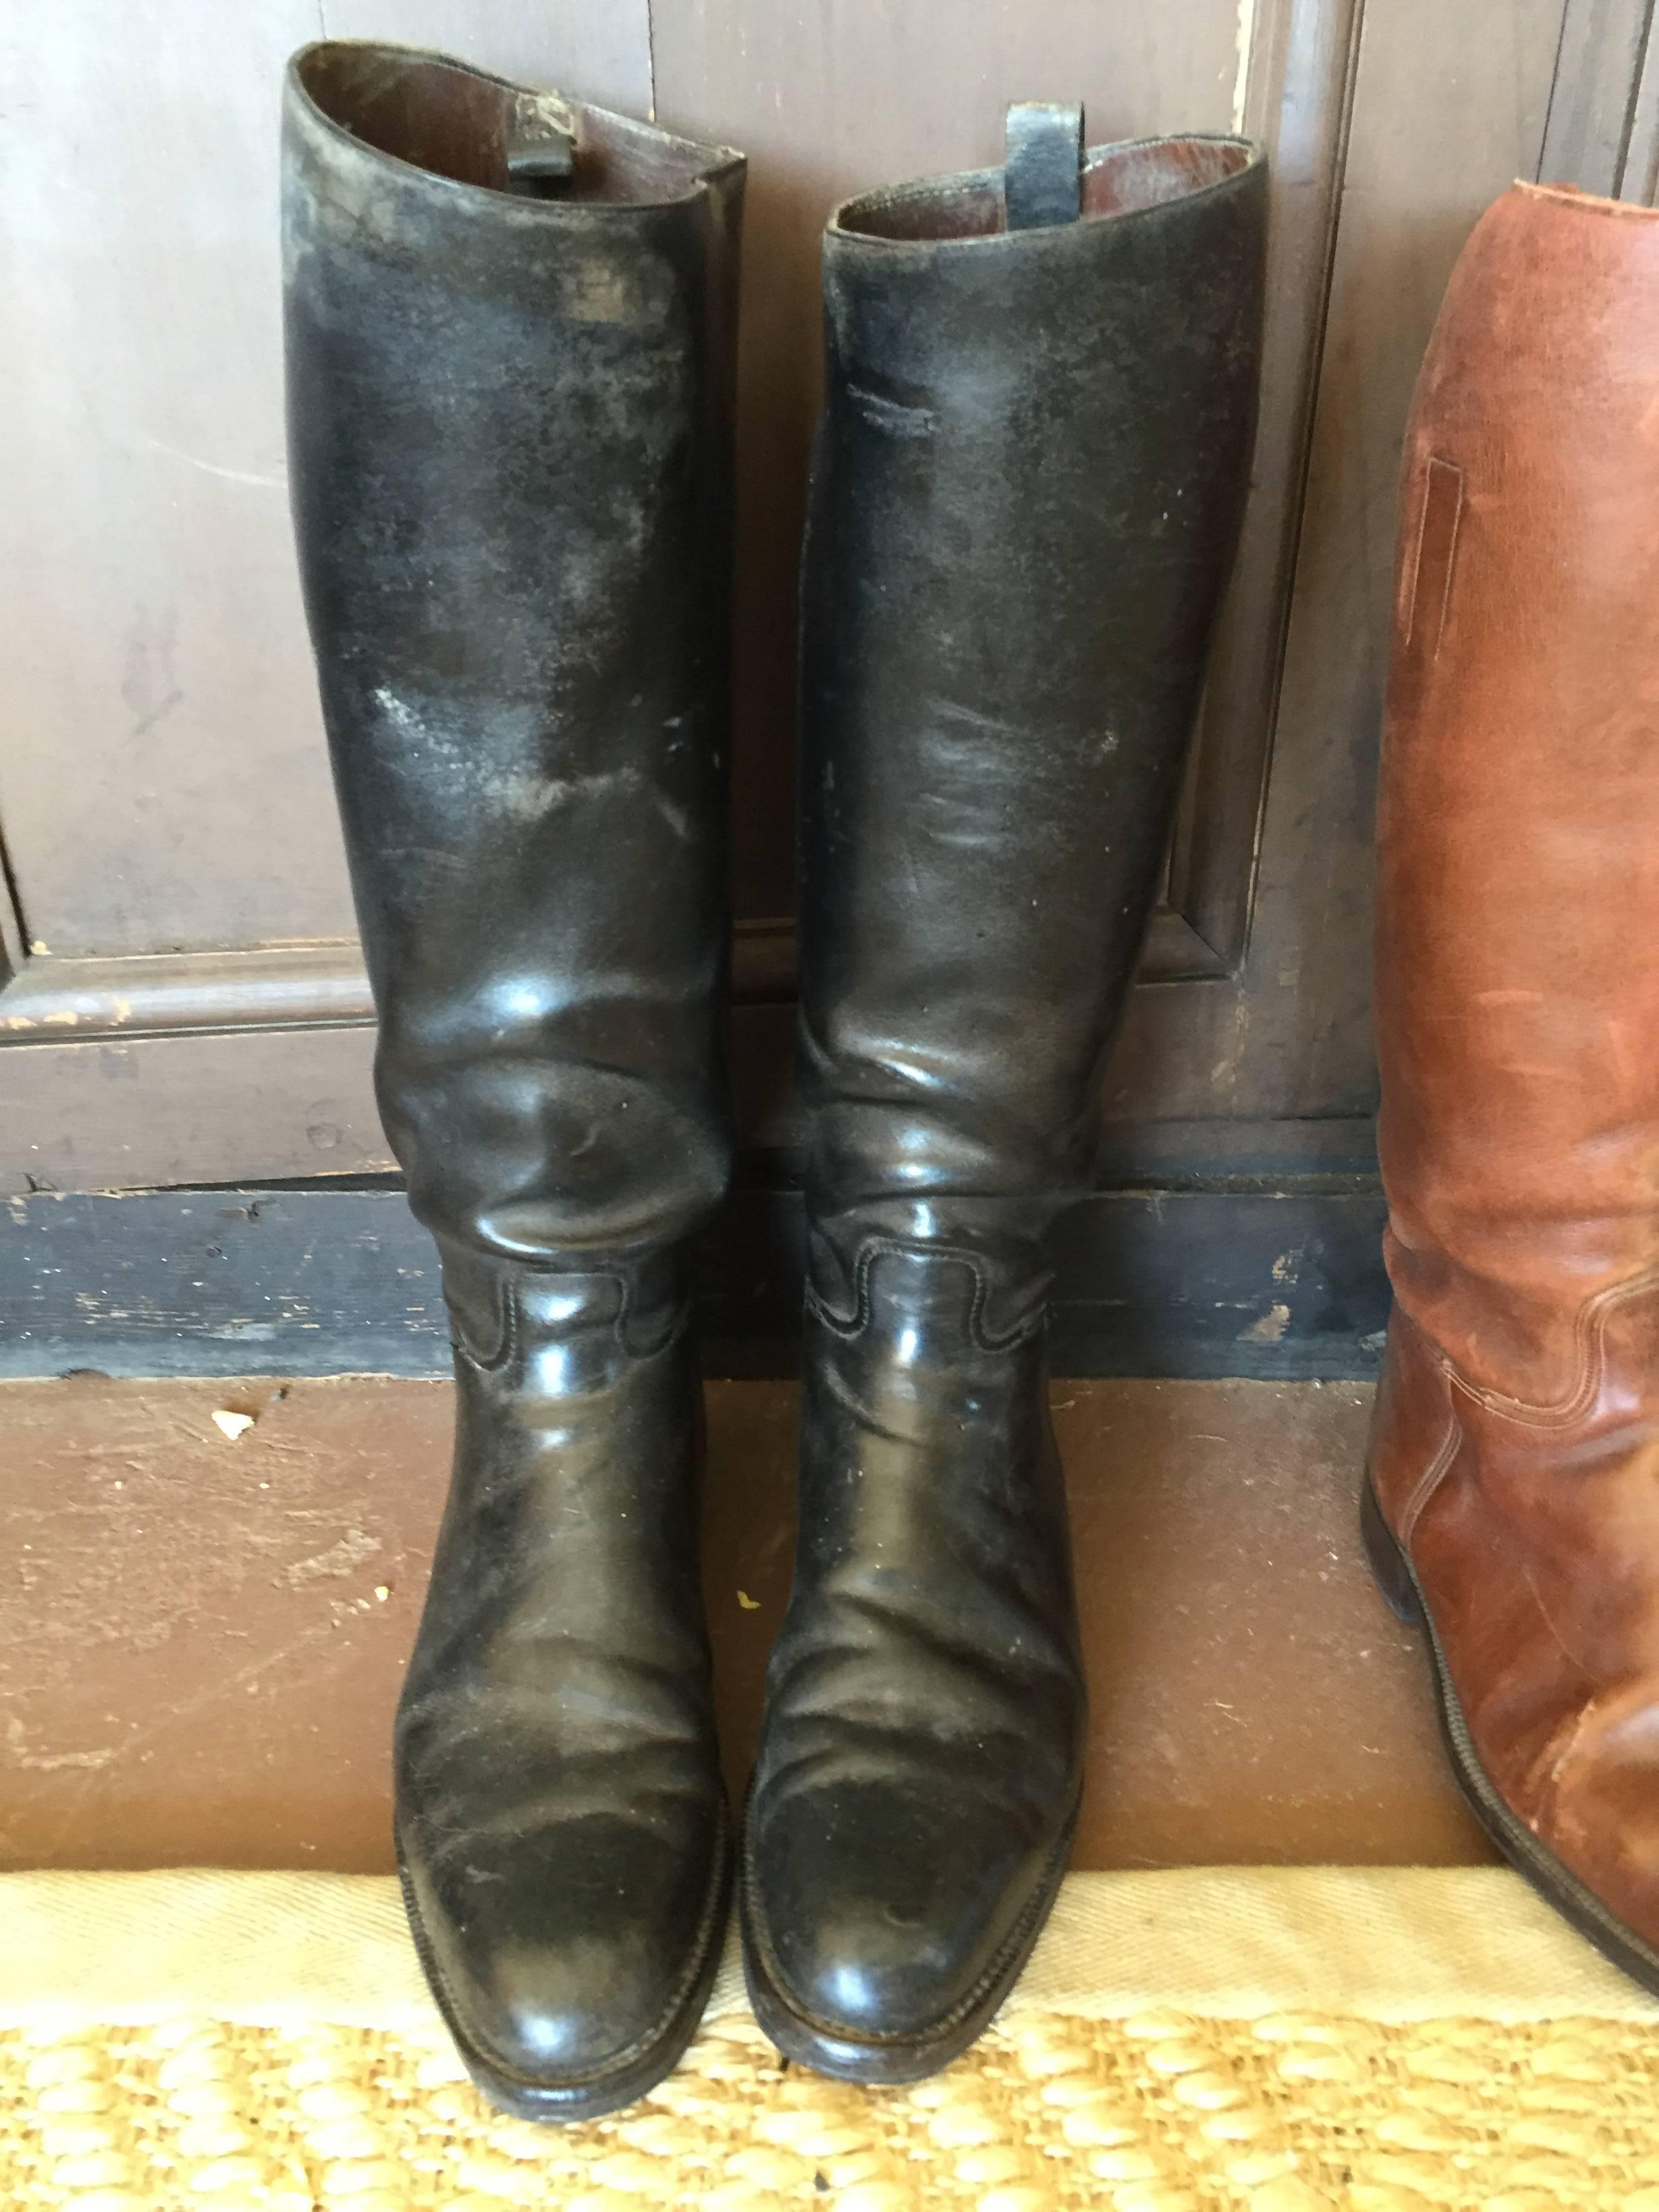 Vintage riding boots. All approximately the same size; please inquire for individual details. Priced per pair.